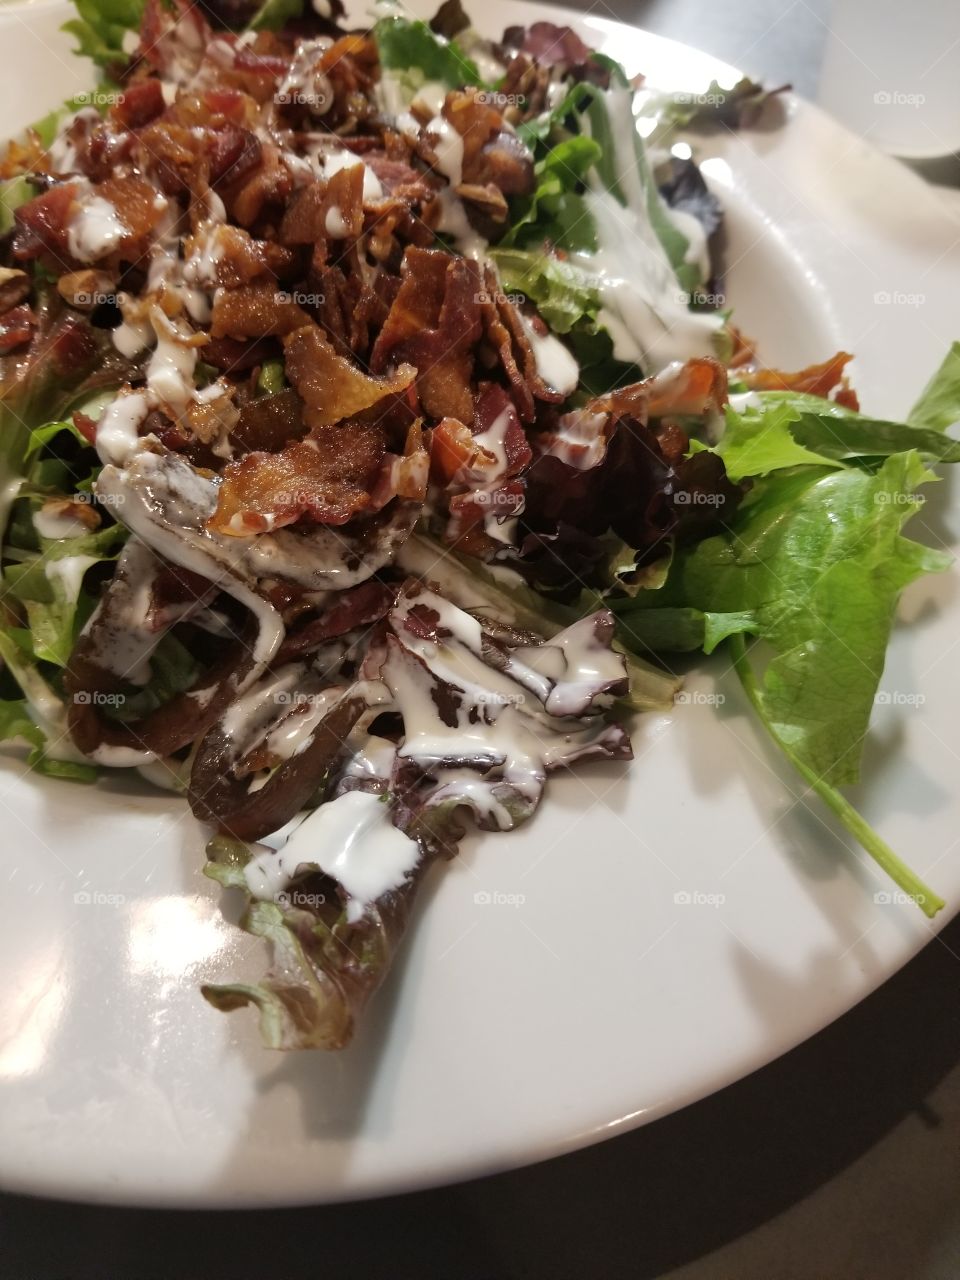 Bacon and Balsamic Onion Salad from Amélie's French Bakery and Café